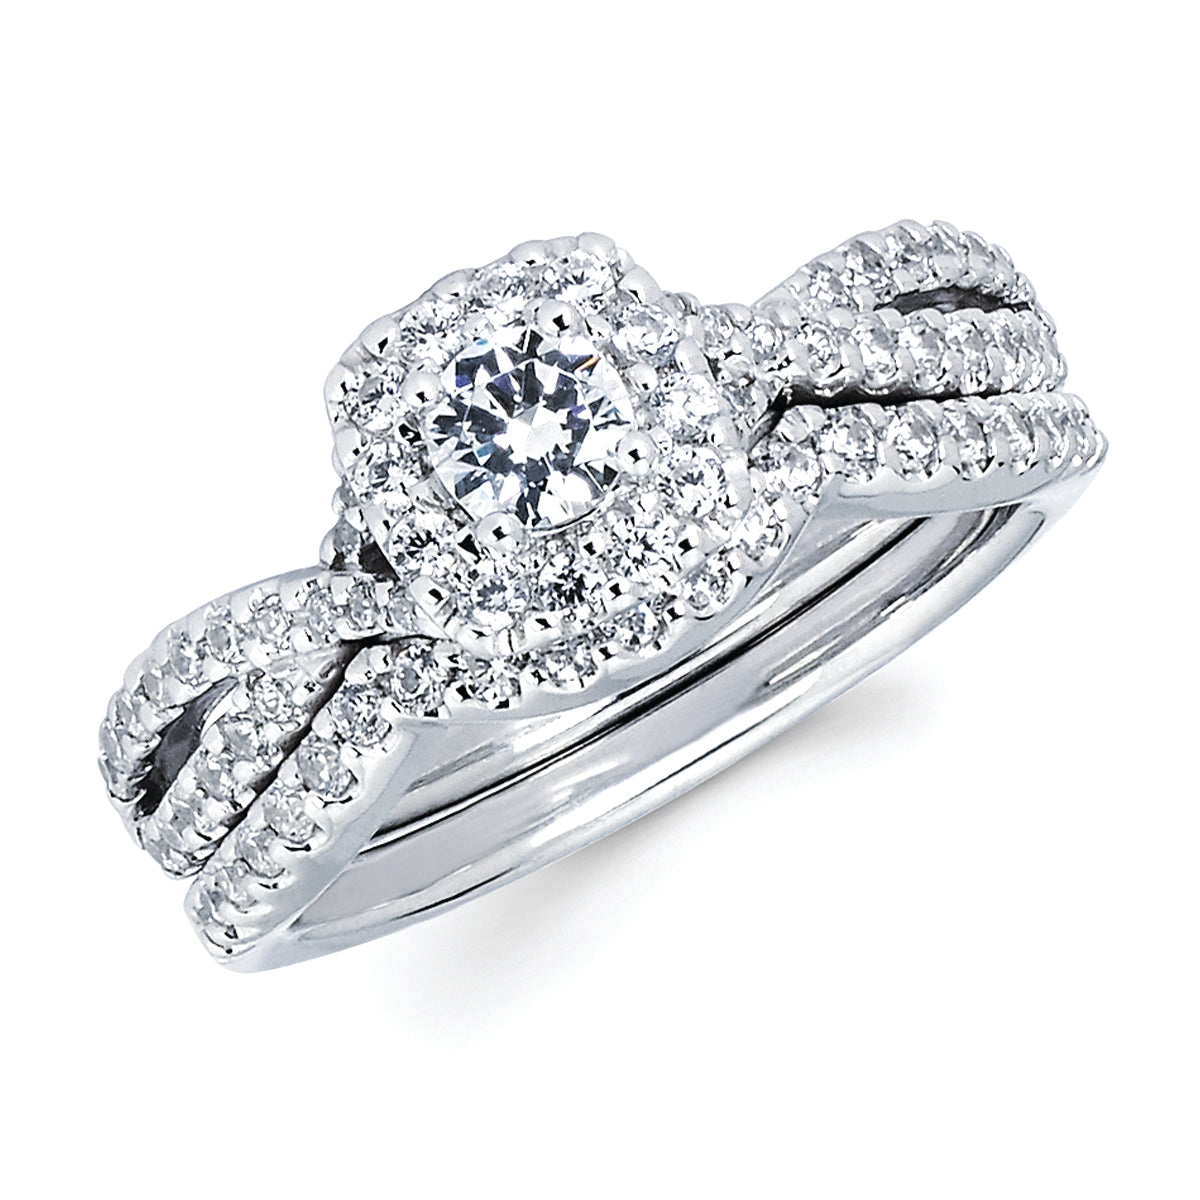 Halo Bridal: 3/8 Ctw.Diamond Semi Mount available for 1/4 Ctw. Round Center Diamond in 14K Gold